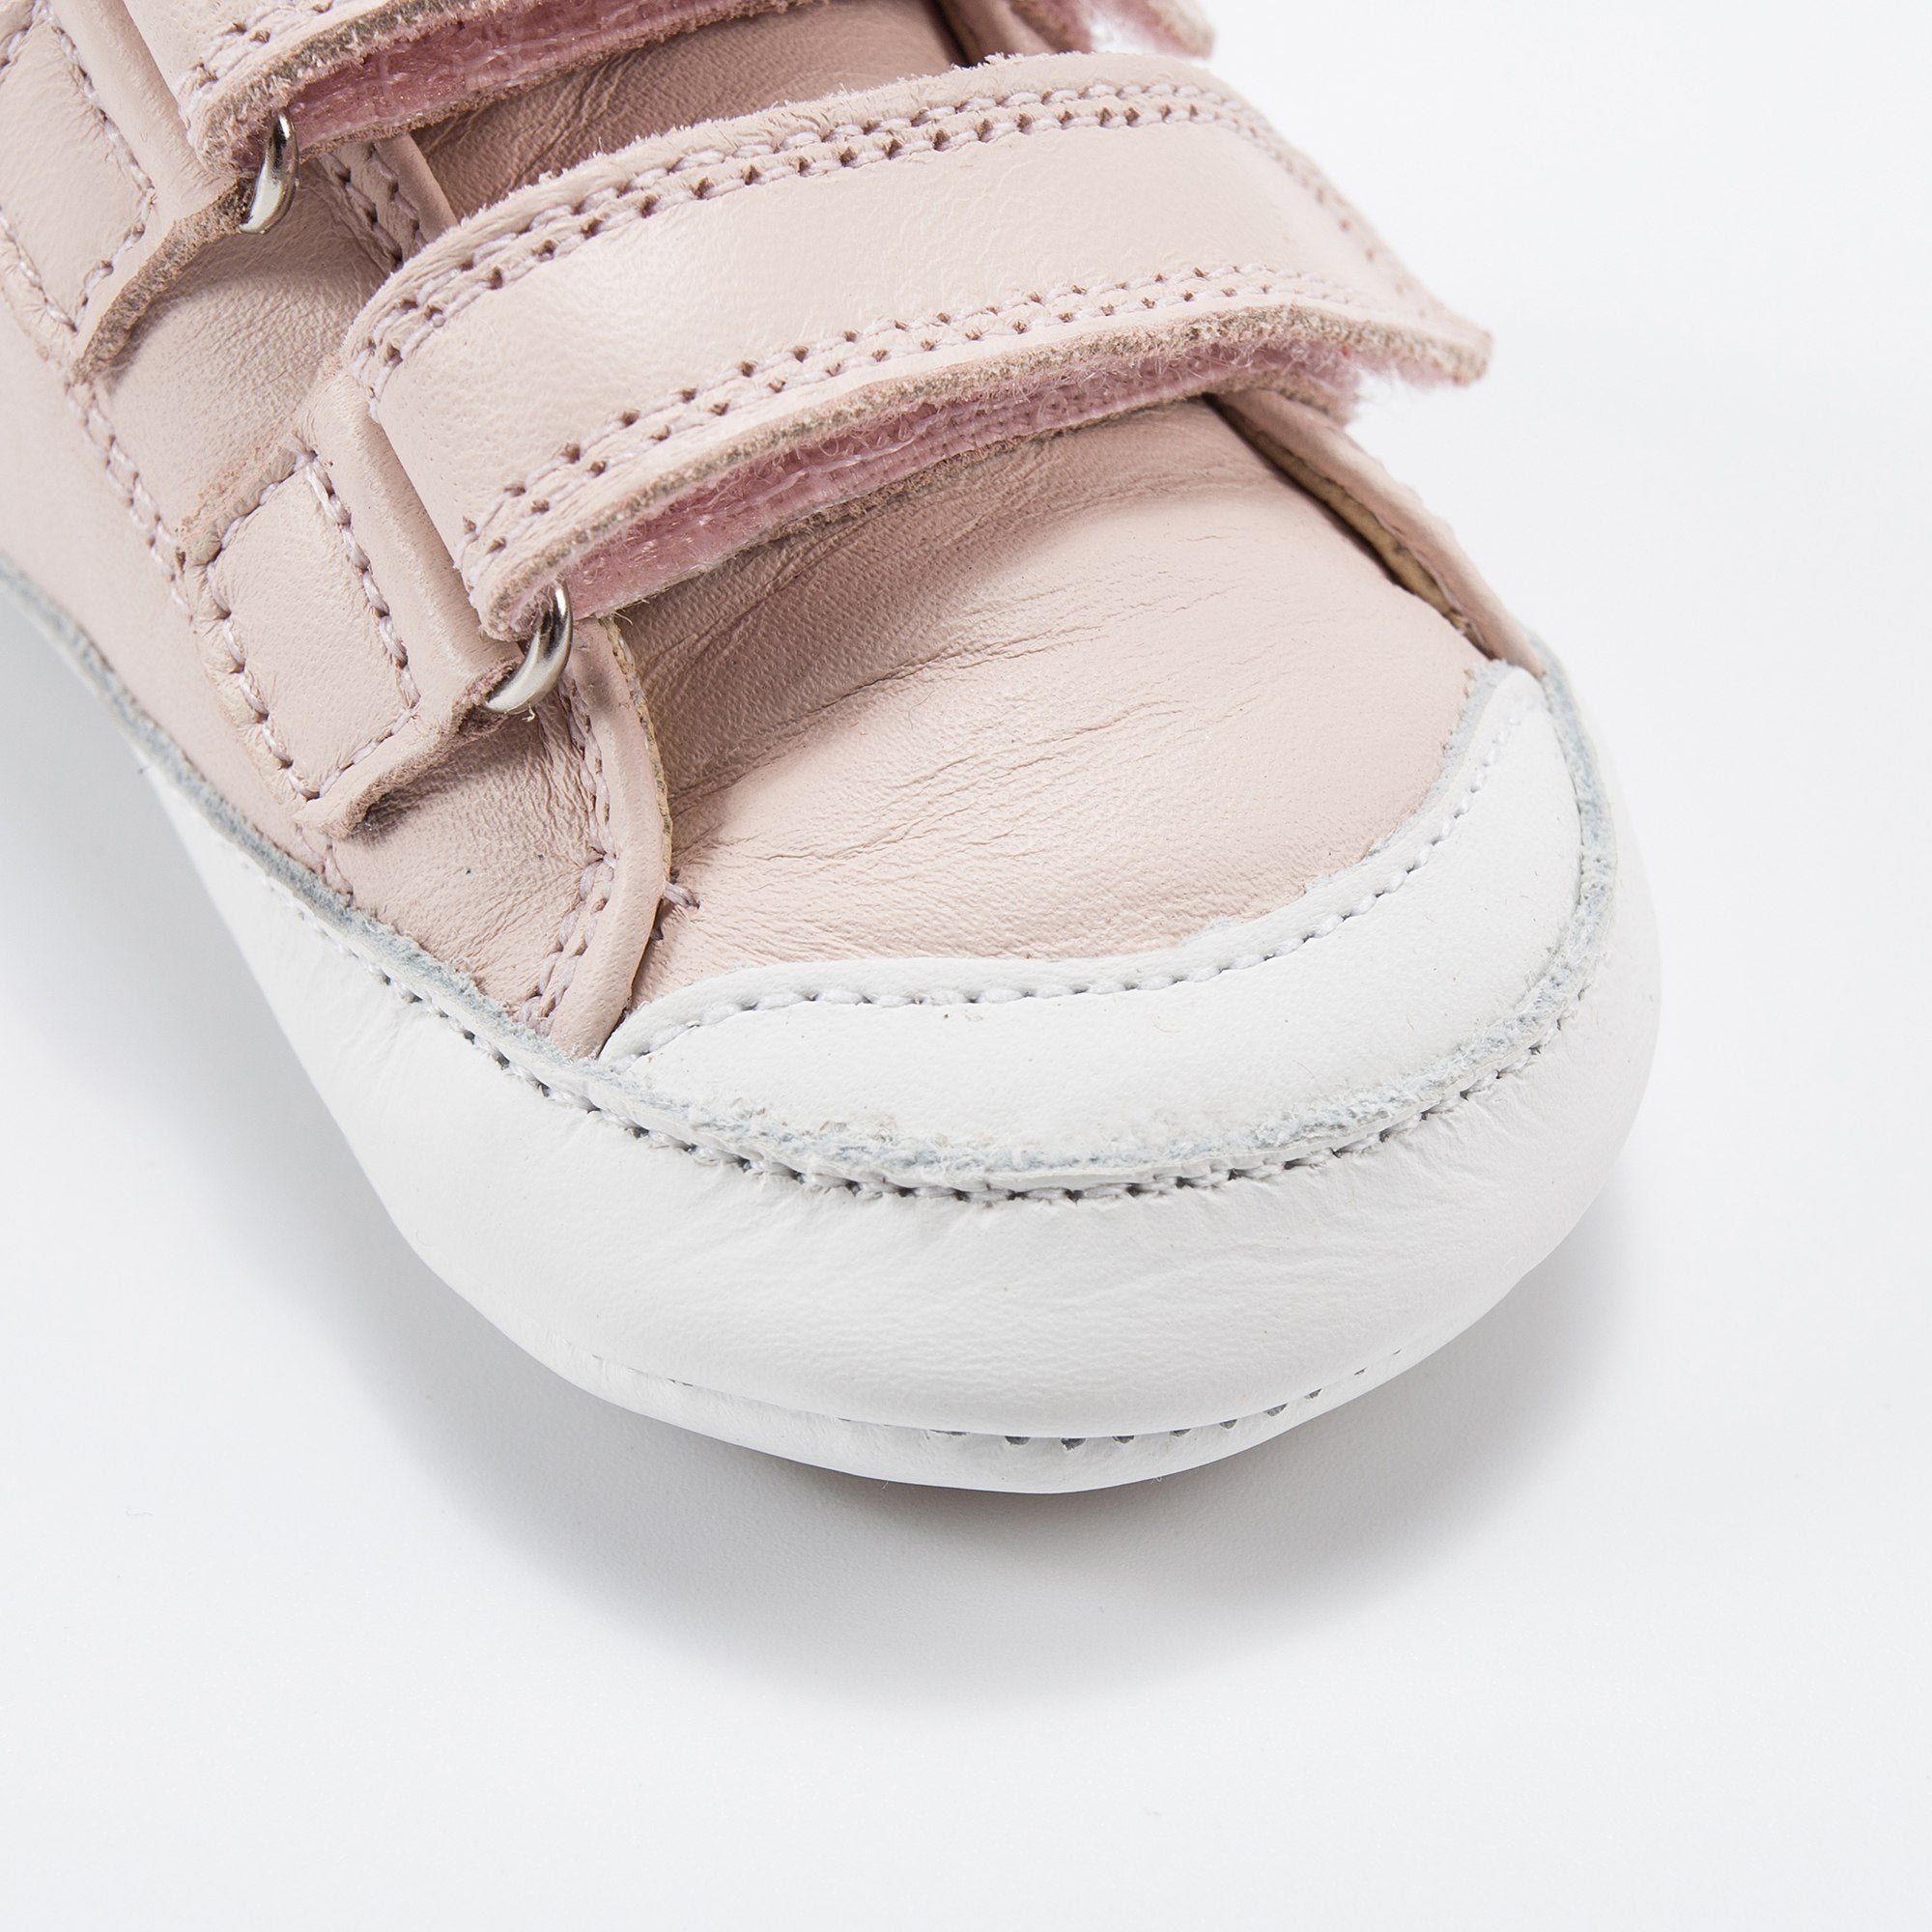 Baby Girls Cotton Candy Leather Shoes